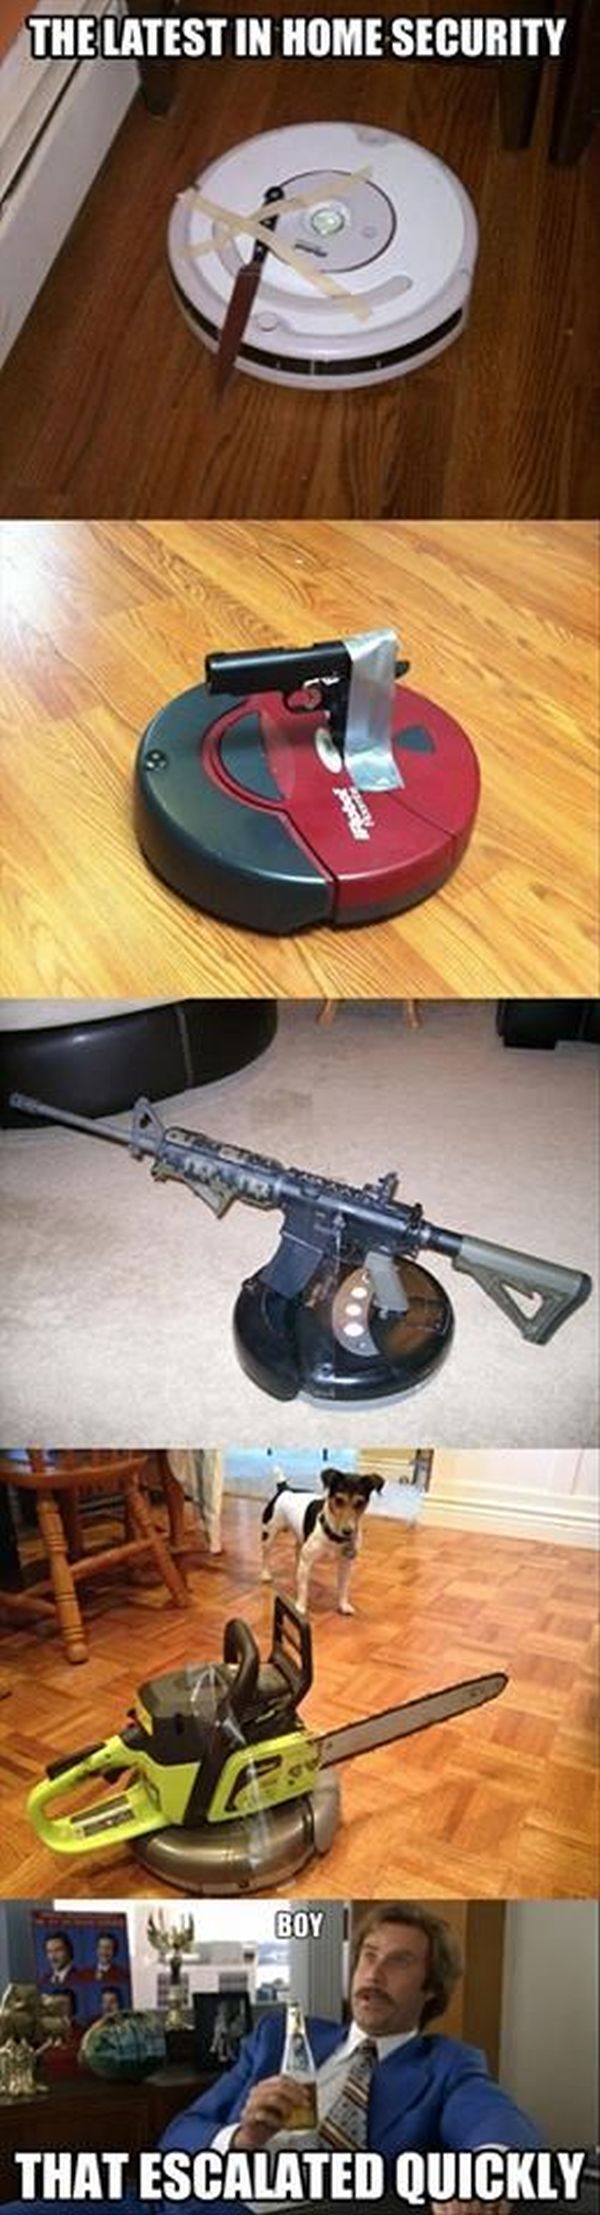 The Latest In Home Security – Military humor